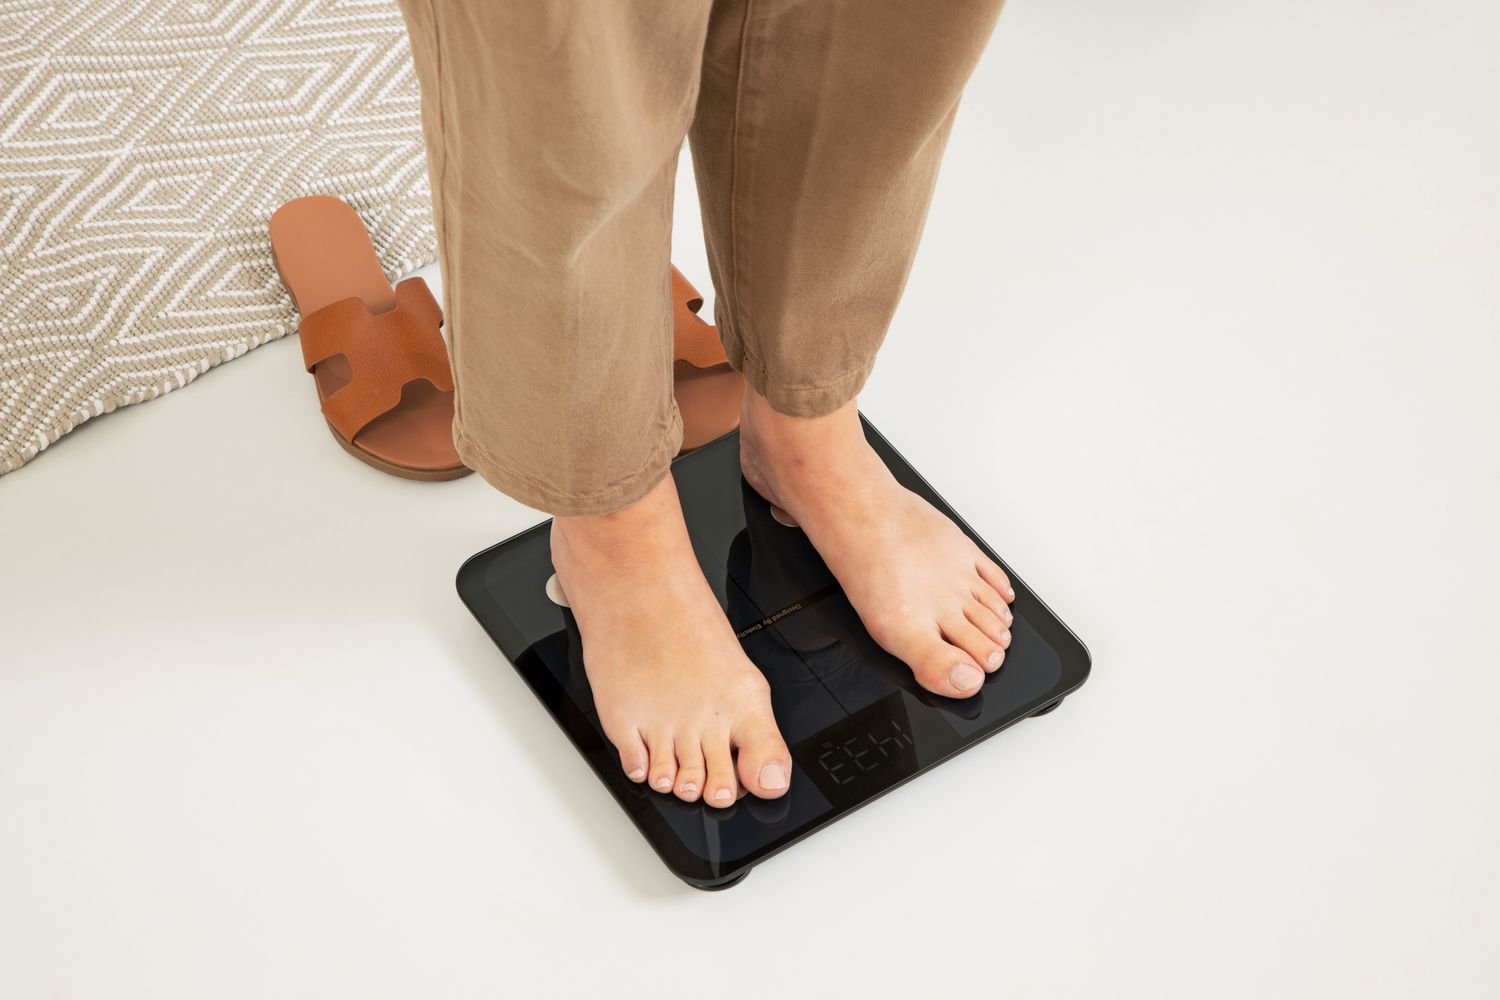 Bathroom Scale Review: The Best Options for Accurate Weight Tracking